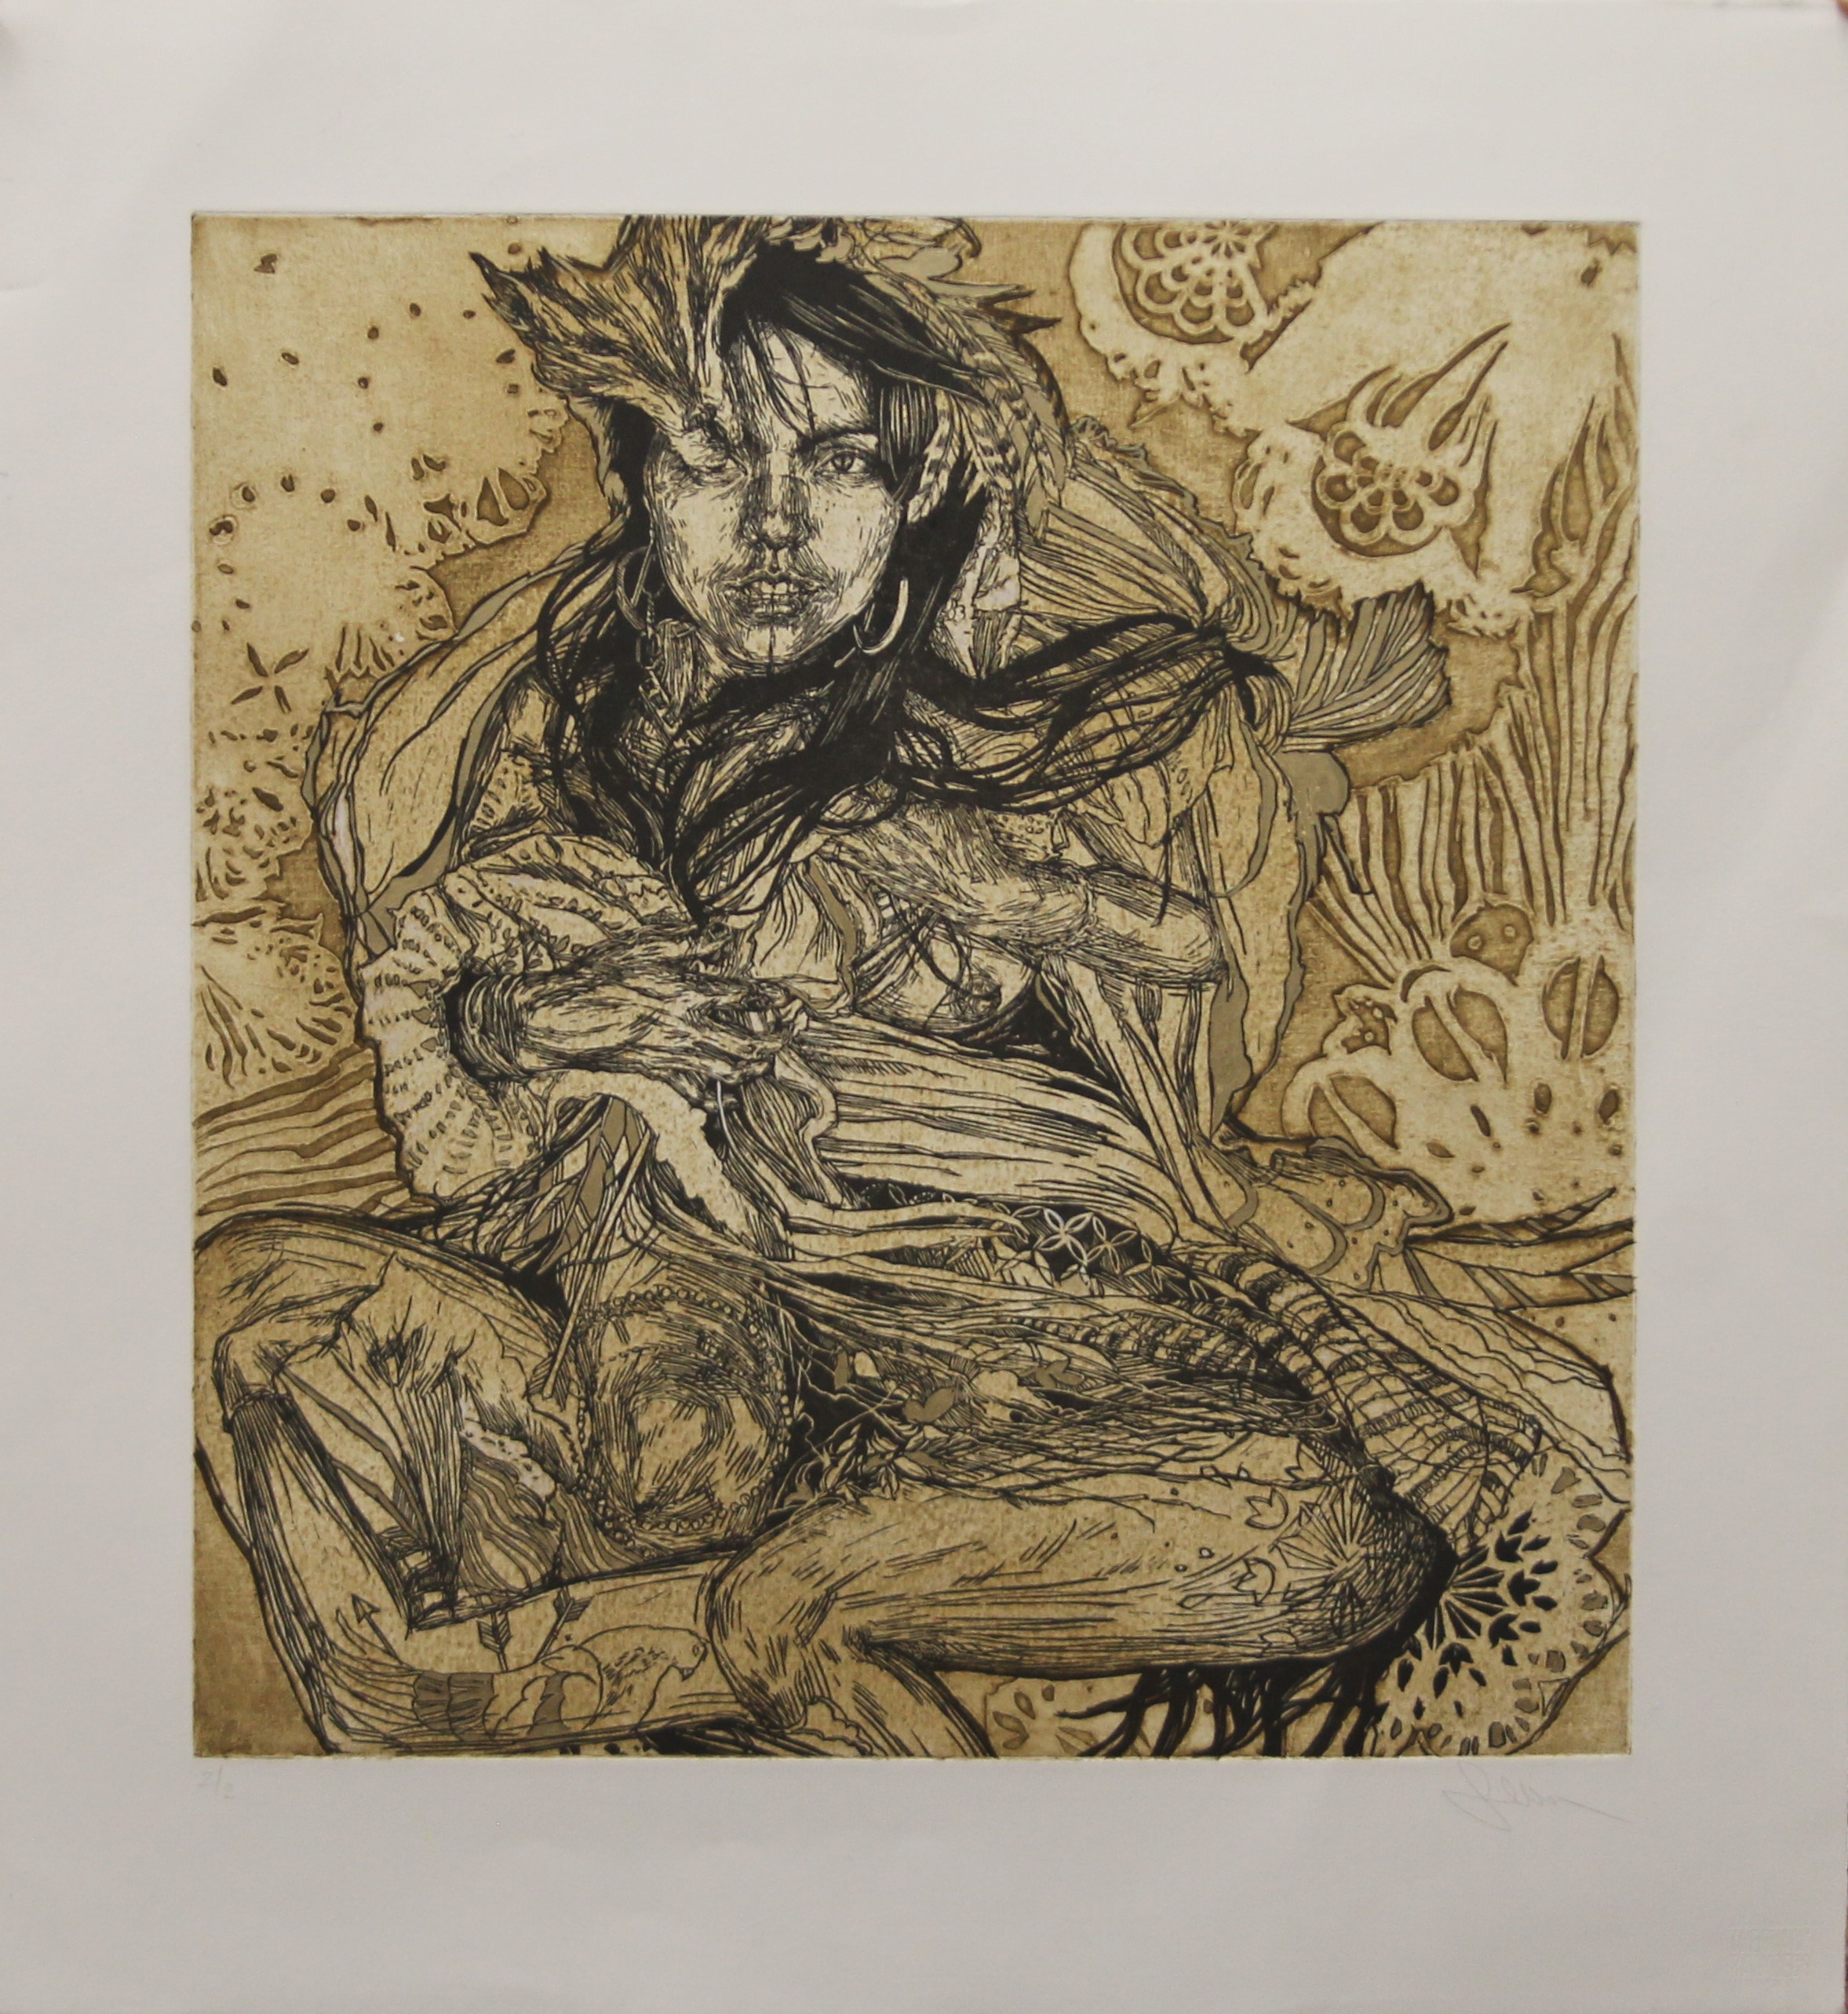 SWOON (AR), Monica, limited edition, signed and numbered 2/2, unframed. 68 x 73.5 cm overall. - Image 2 of 3